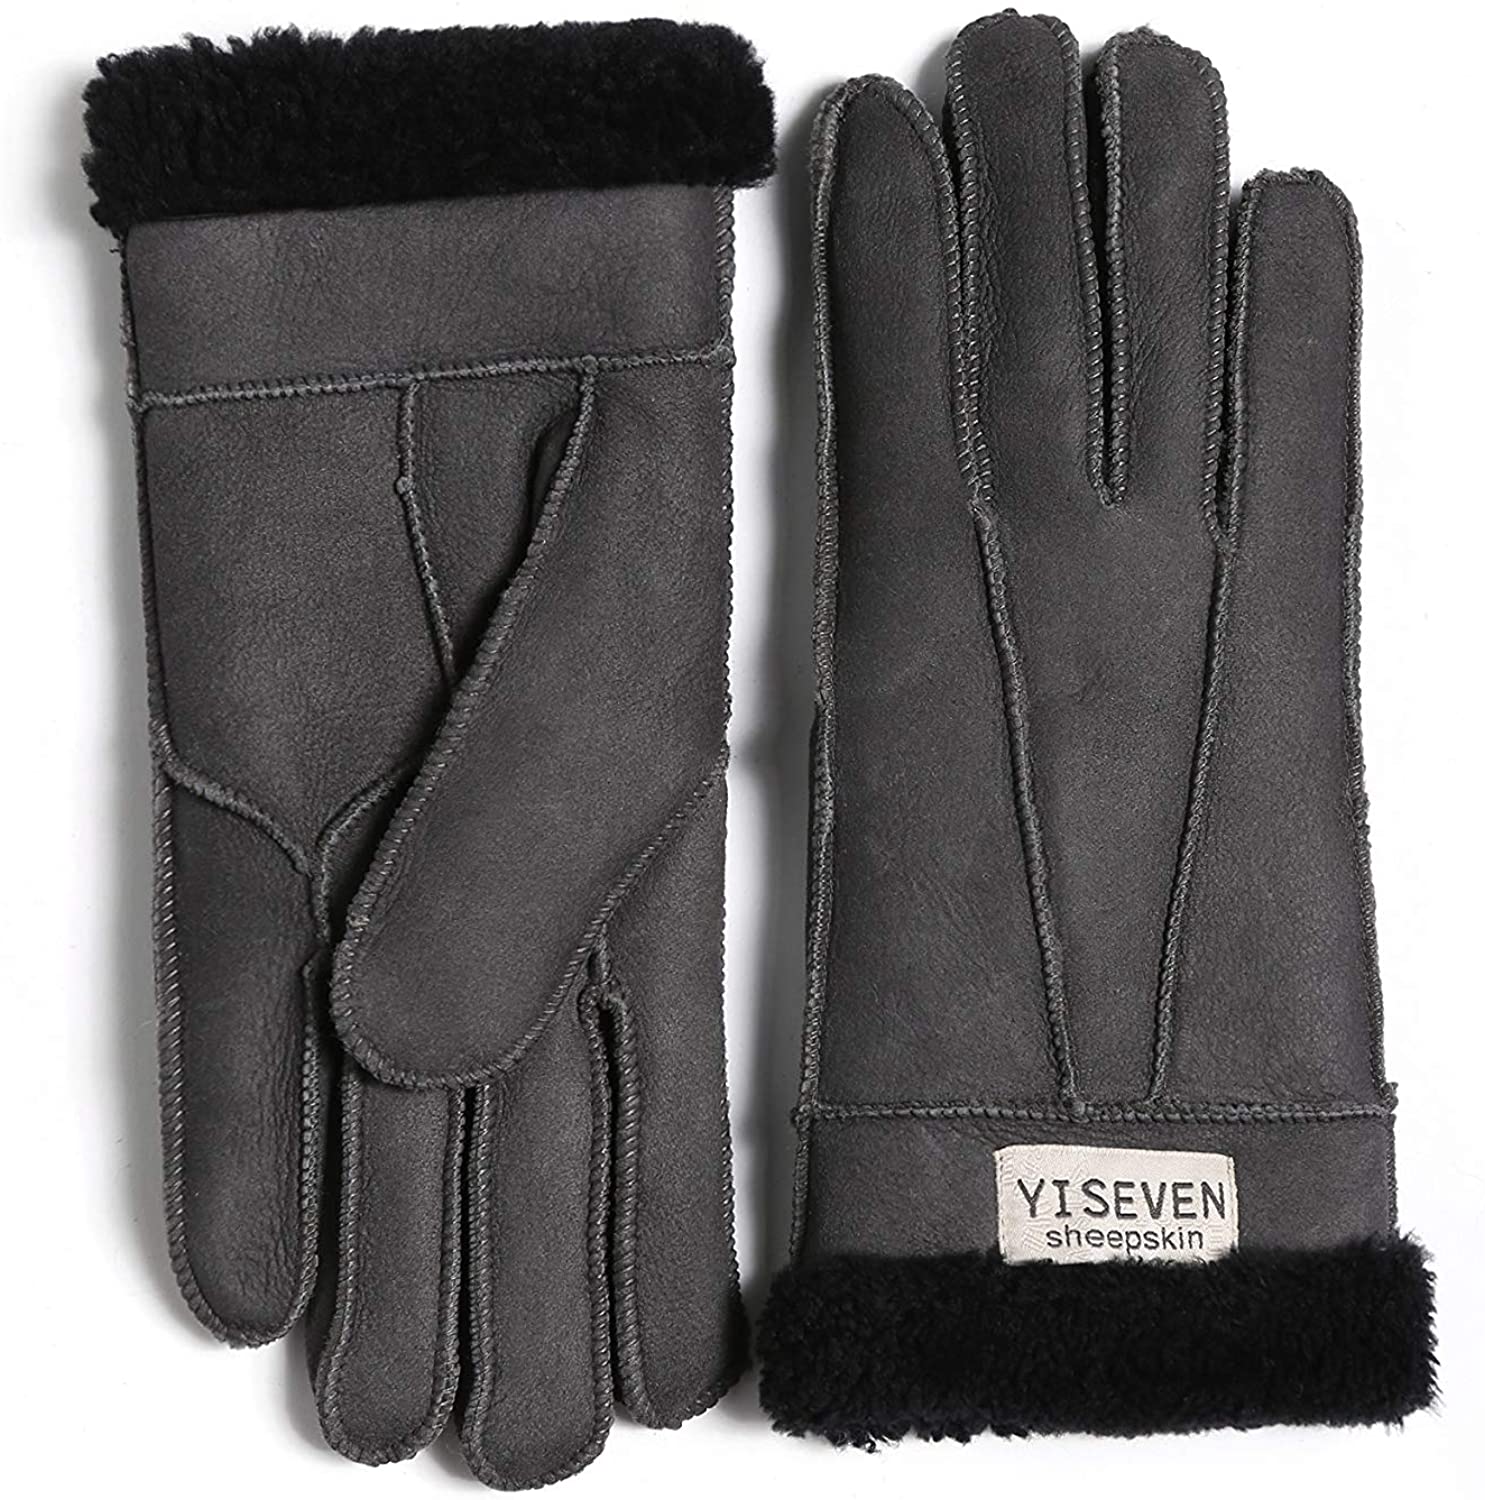 YISEVEN Women's Wool Lined Winter Genuine Leather Gloves Touchscreen Three  Points Driving Elegant Dress Sheepskin Warm Fur Lining for Cold Weather  Accessories New Year Gifts, Black Small/6.5” at  Women's Clothing  store